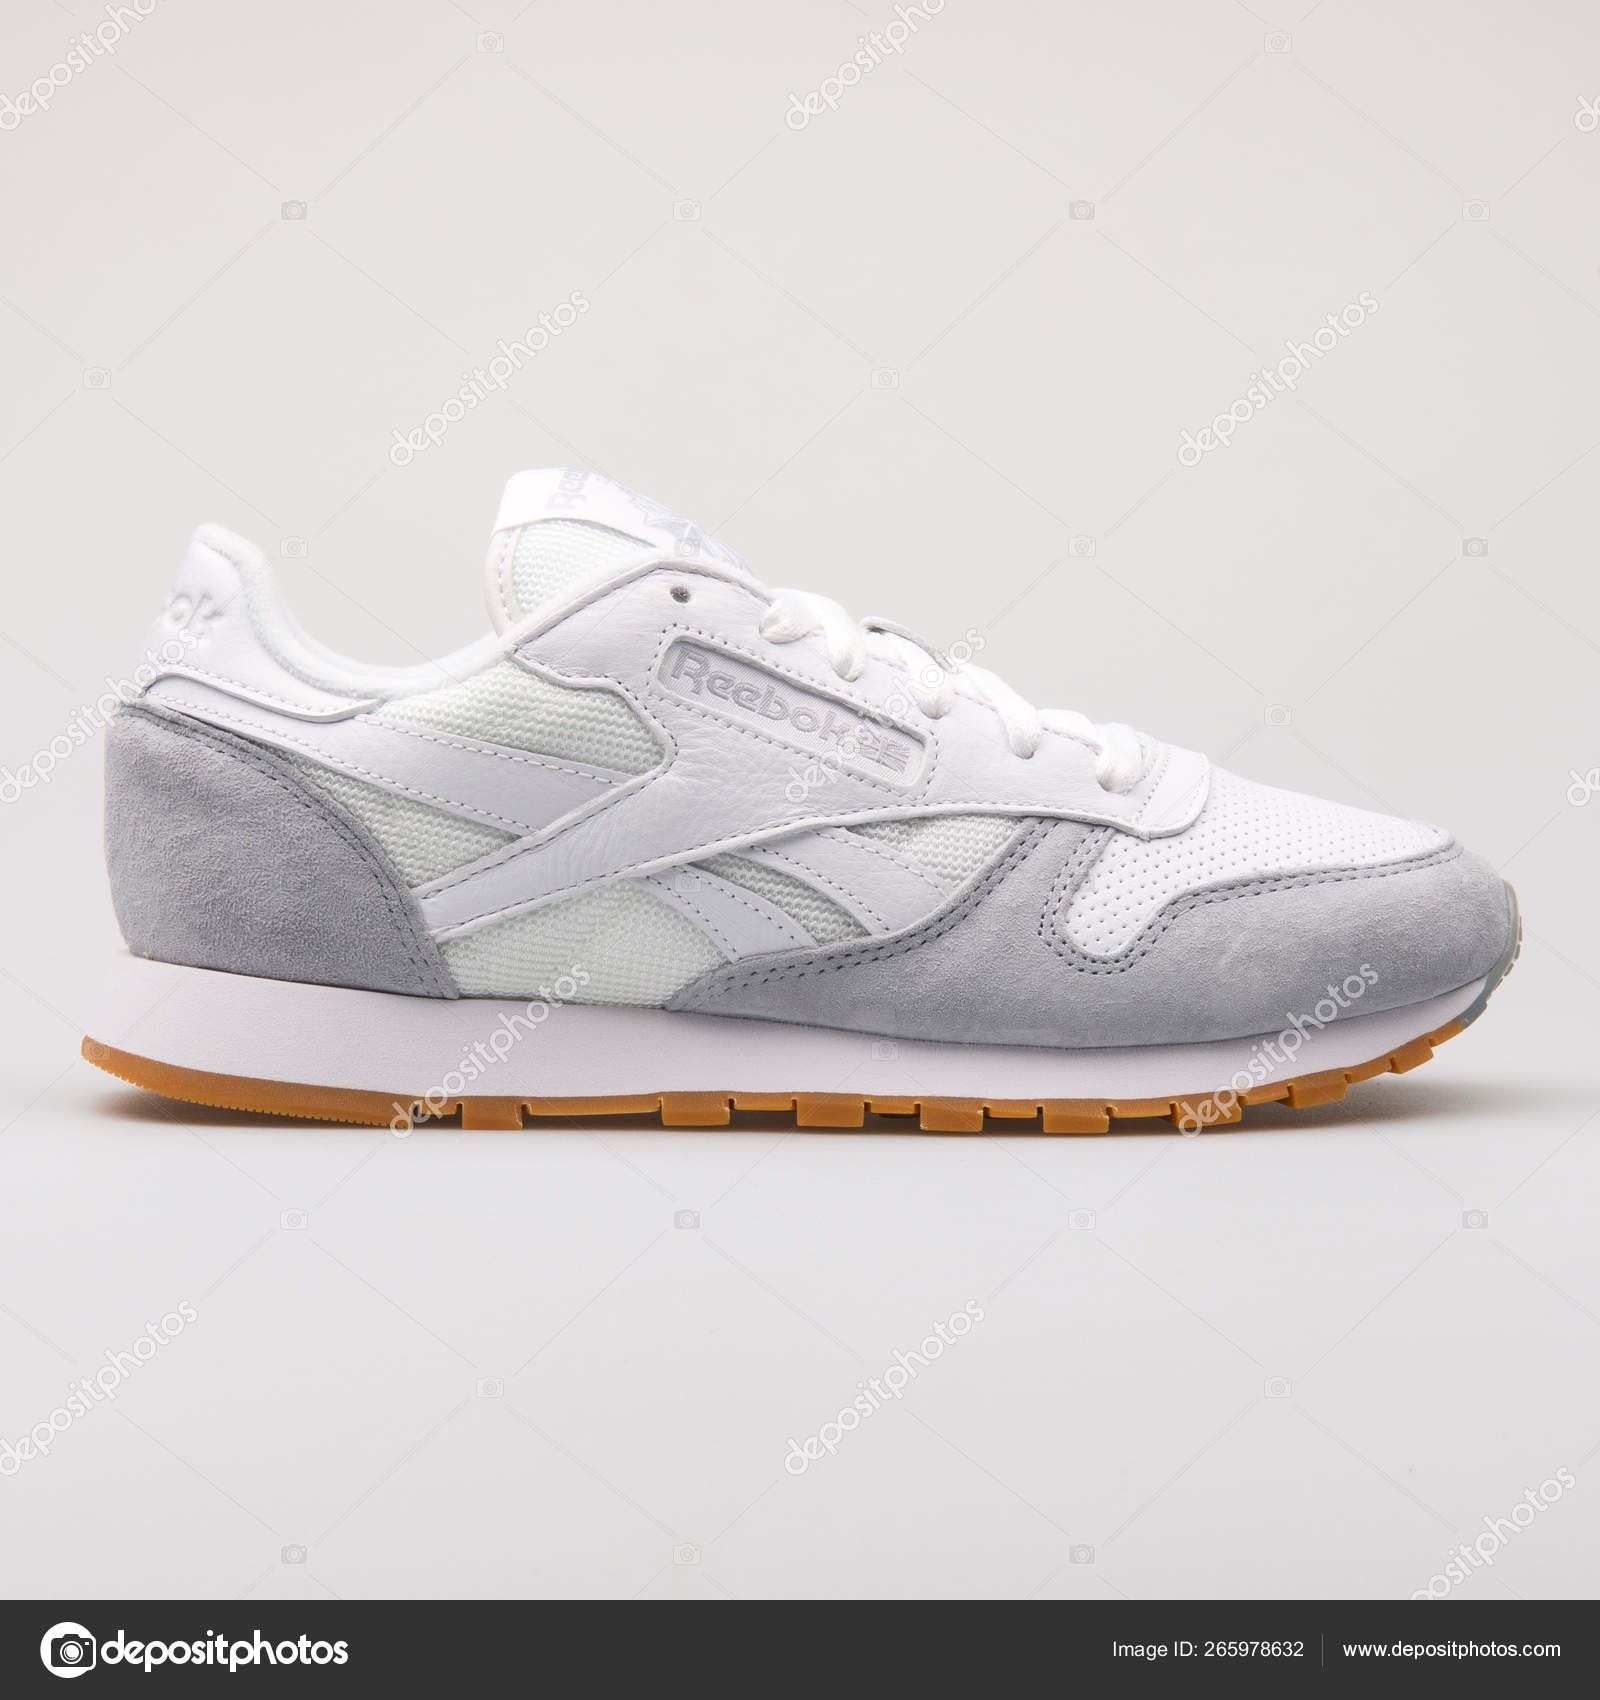 Reebok Classic Leather SPP white and 